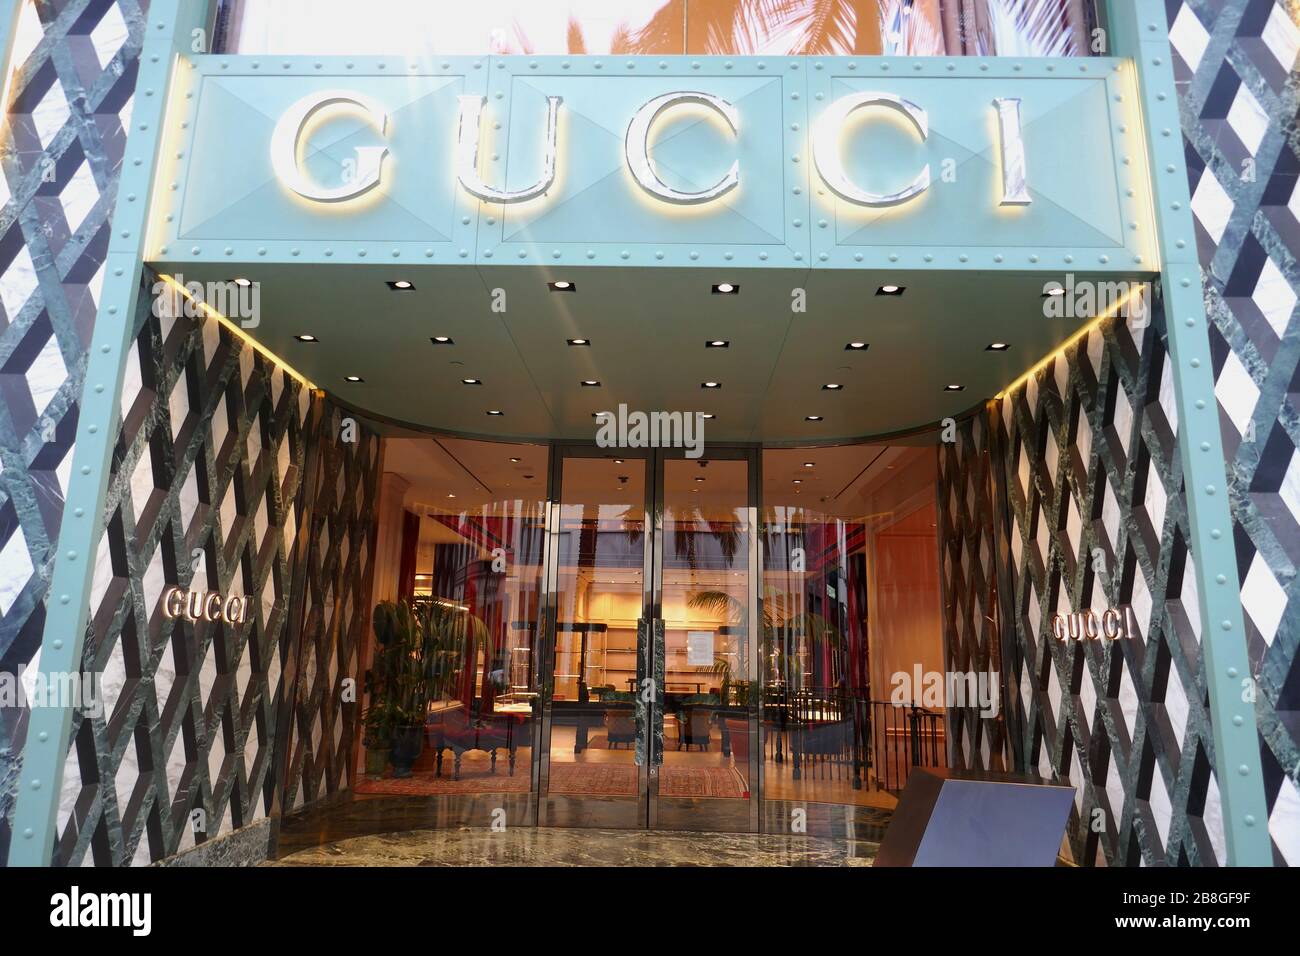 Beverly hills gucci #beverlyhills #robbers #gucci #ontario #mall #inci